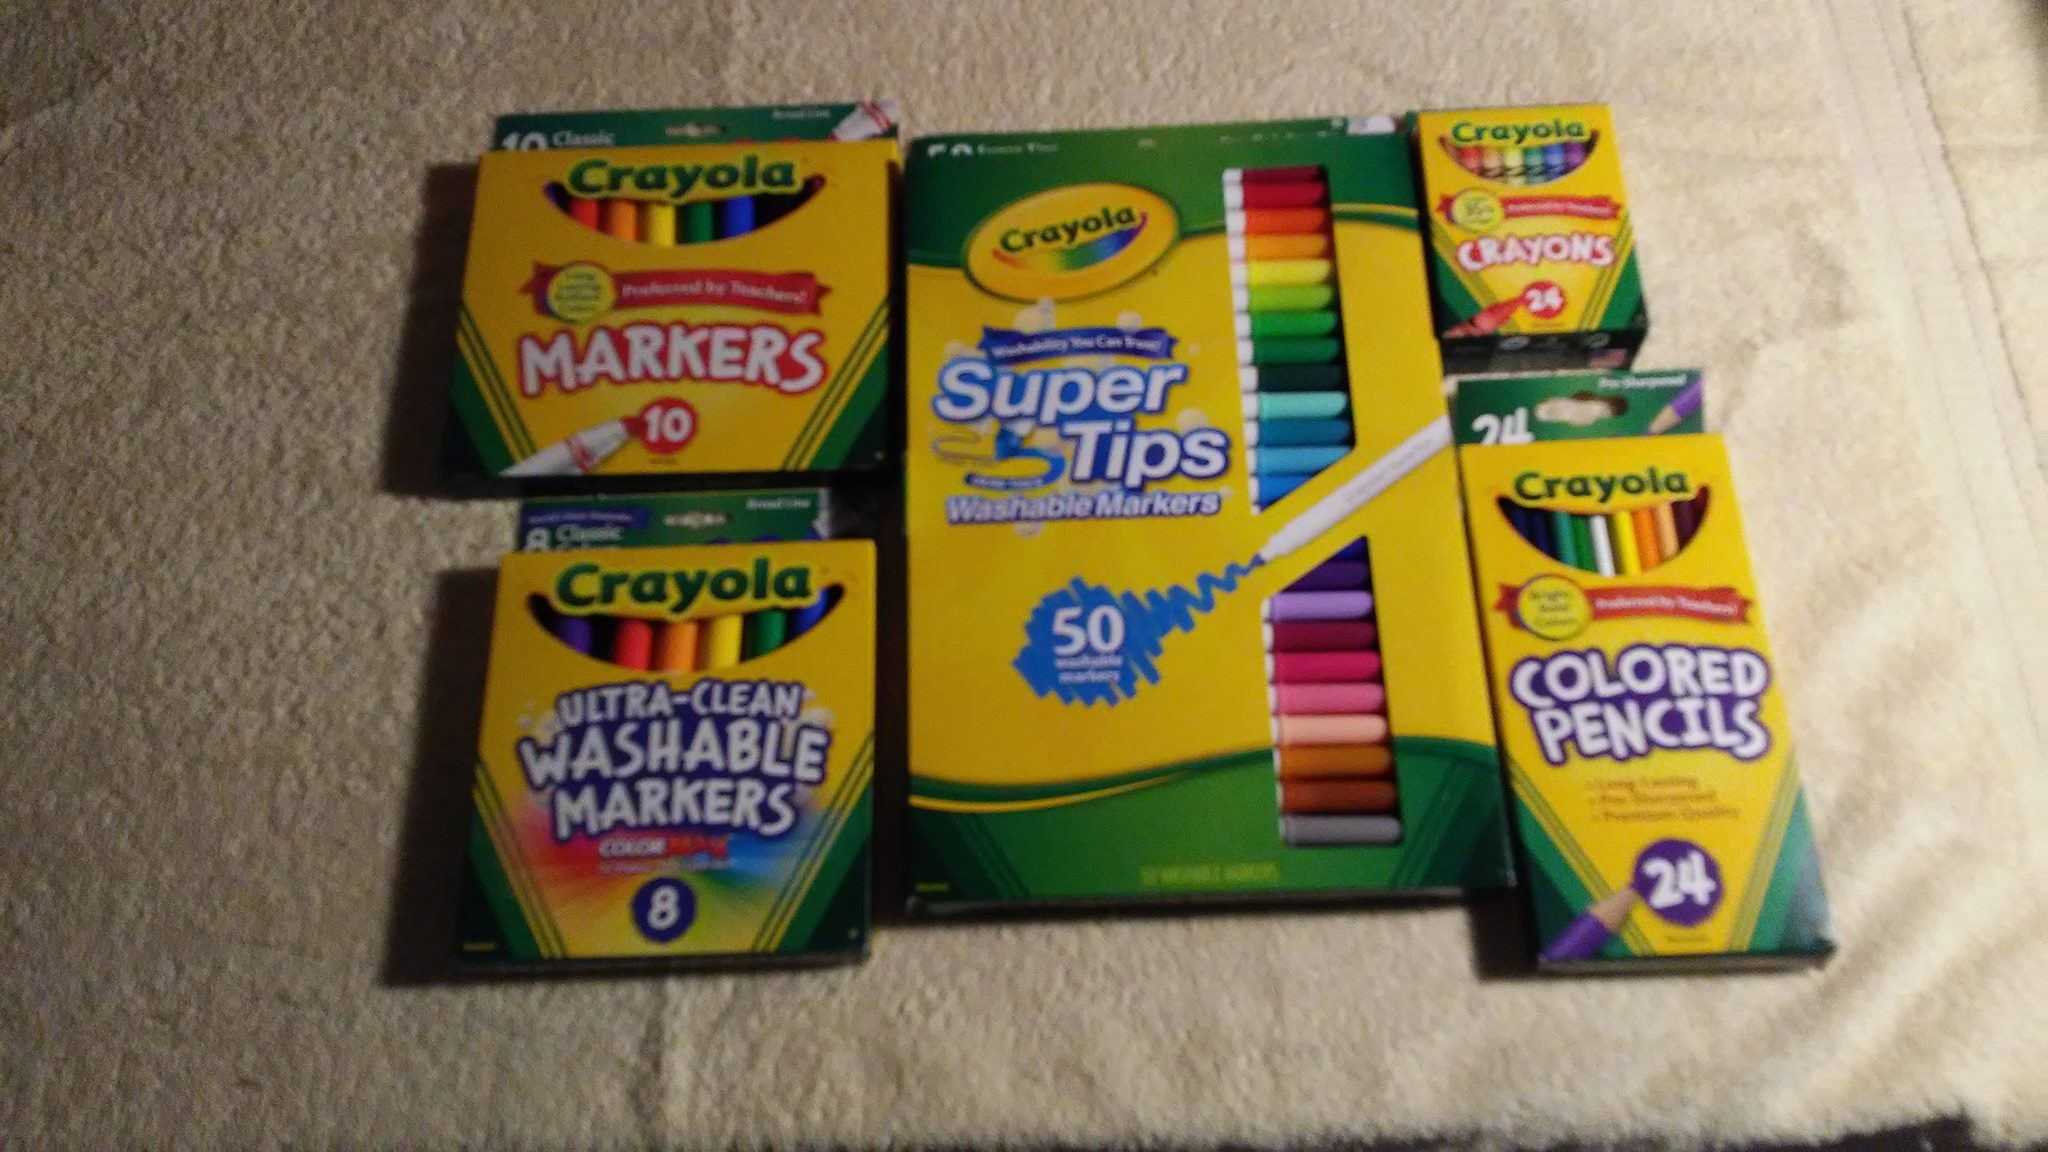 Crayola is making your kids' back to school cool with Silly Scents